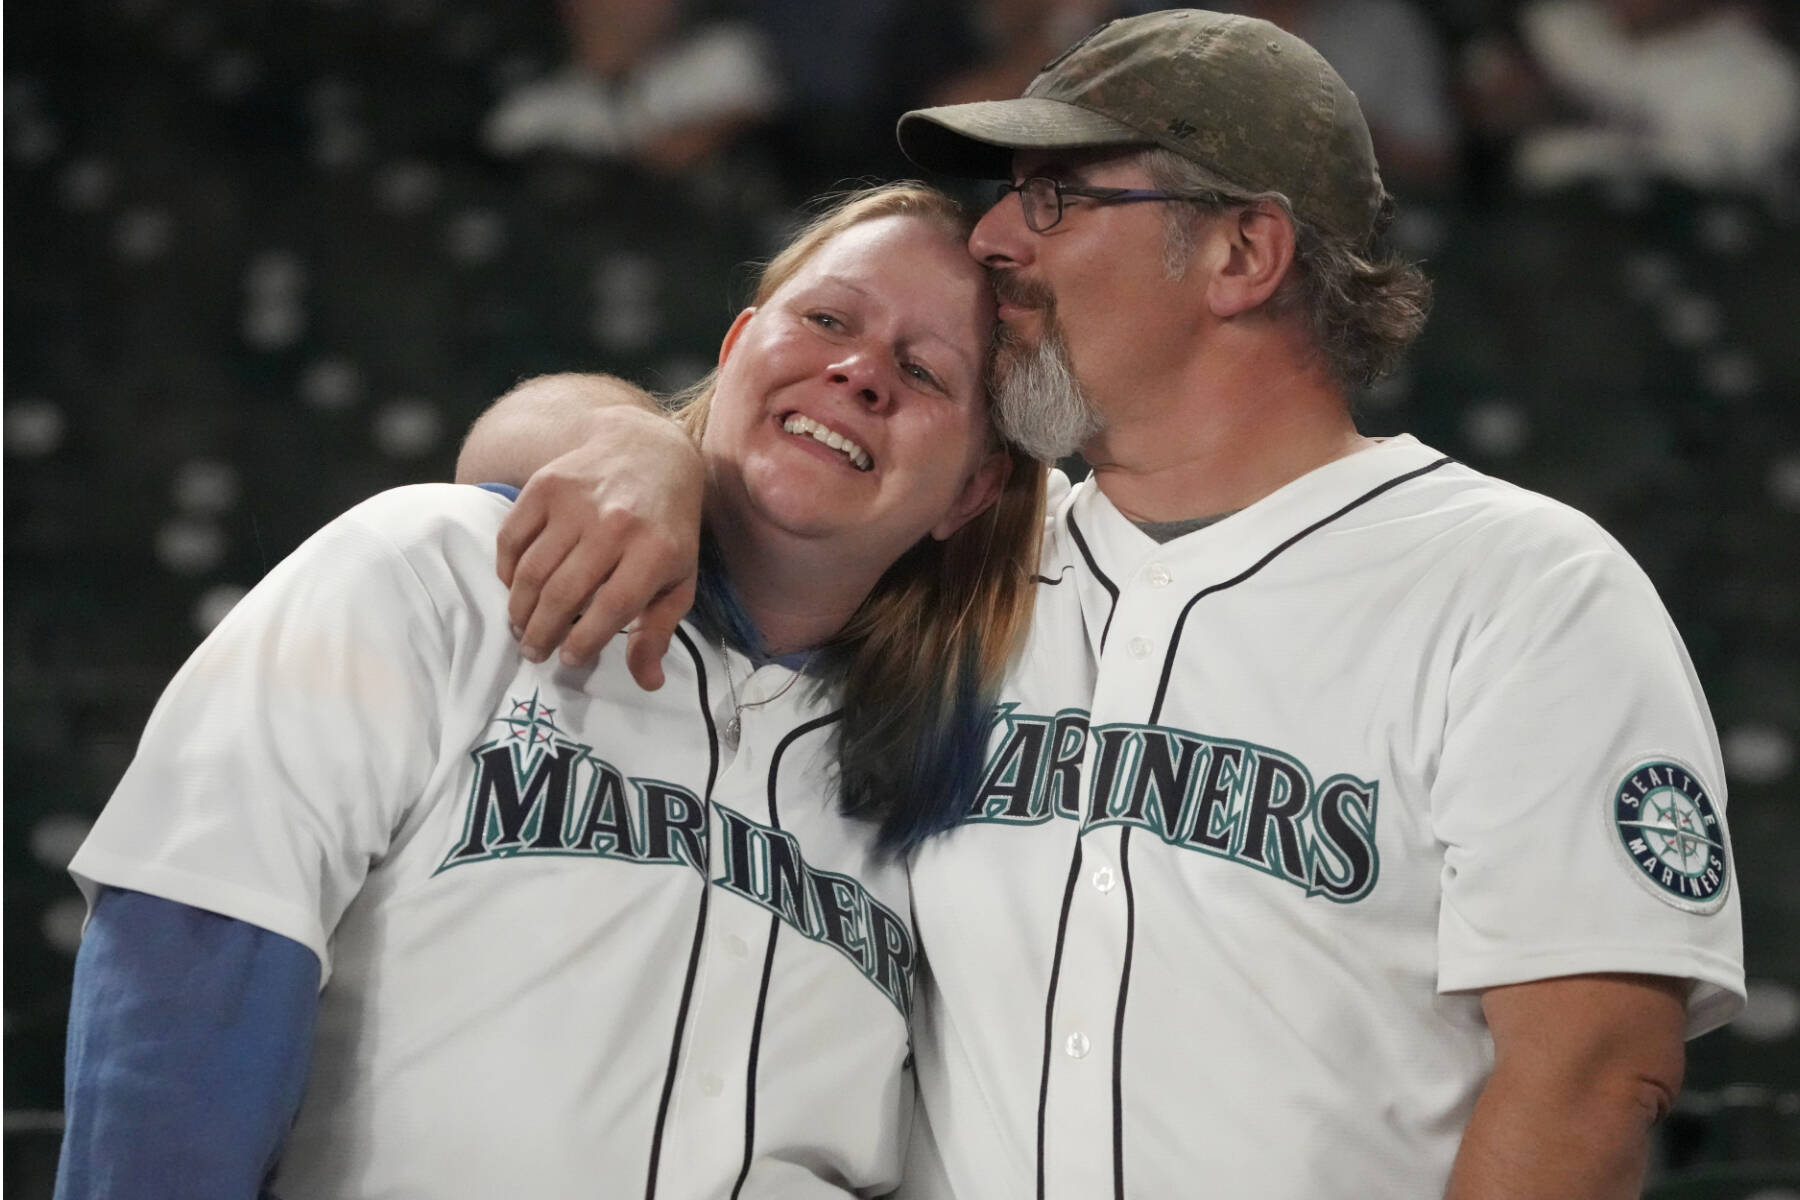 Seattle Mariners fans react after the Seattle Mariners lost to the Houston Astros in Game 3 of an American League Division Series baseball game Saturday, Oct. 15, 2022, in Seattle. (AP Photo/Ted S. Warren)